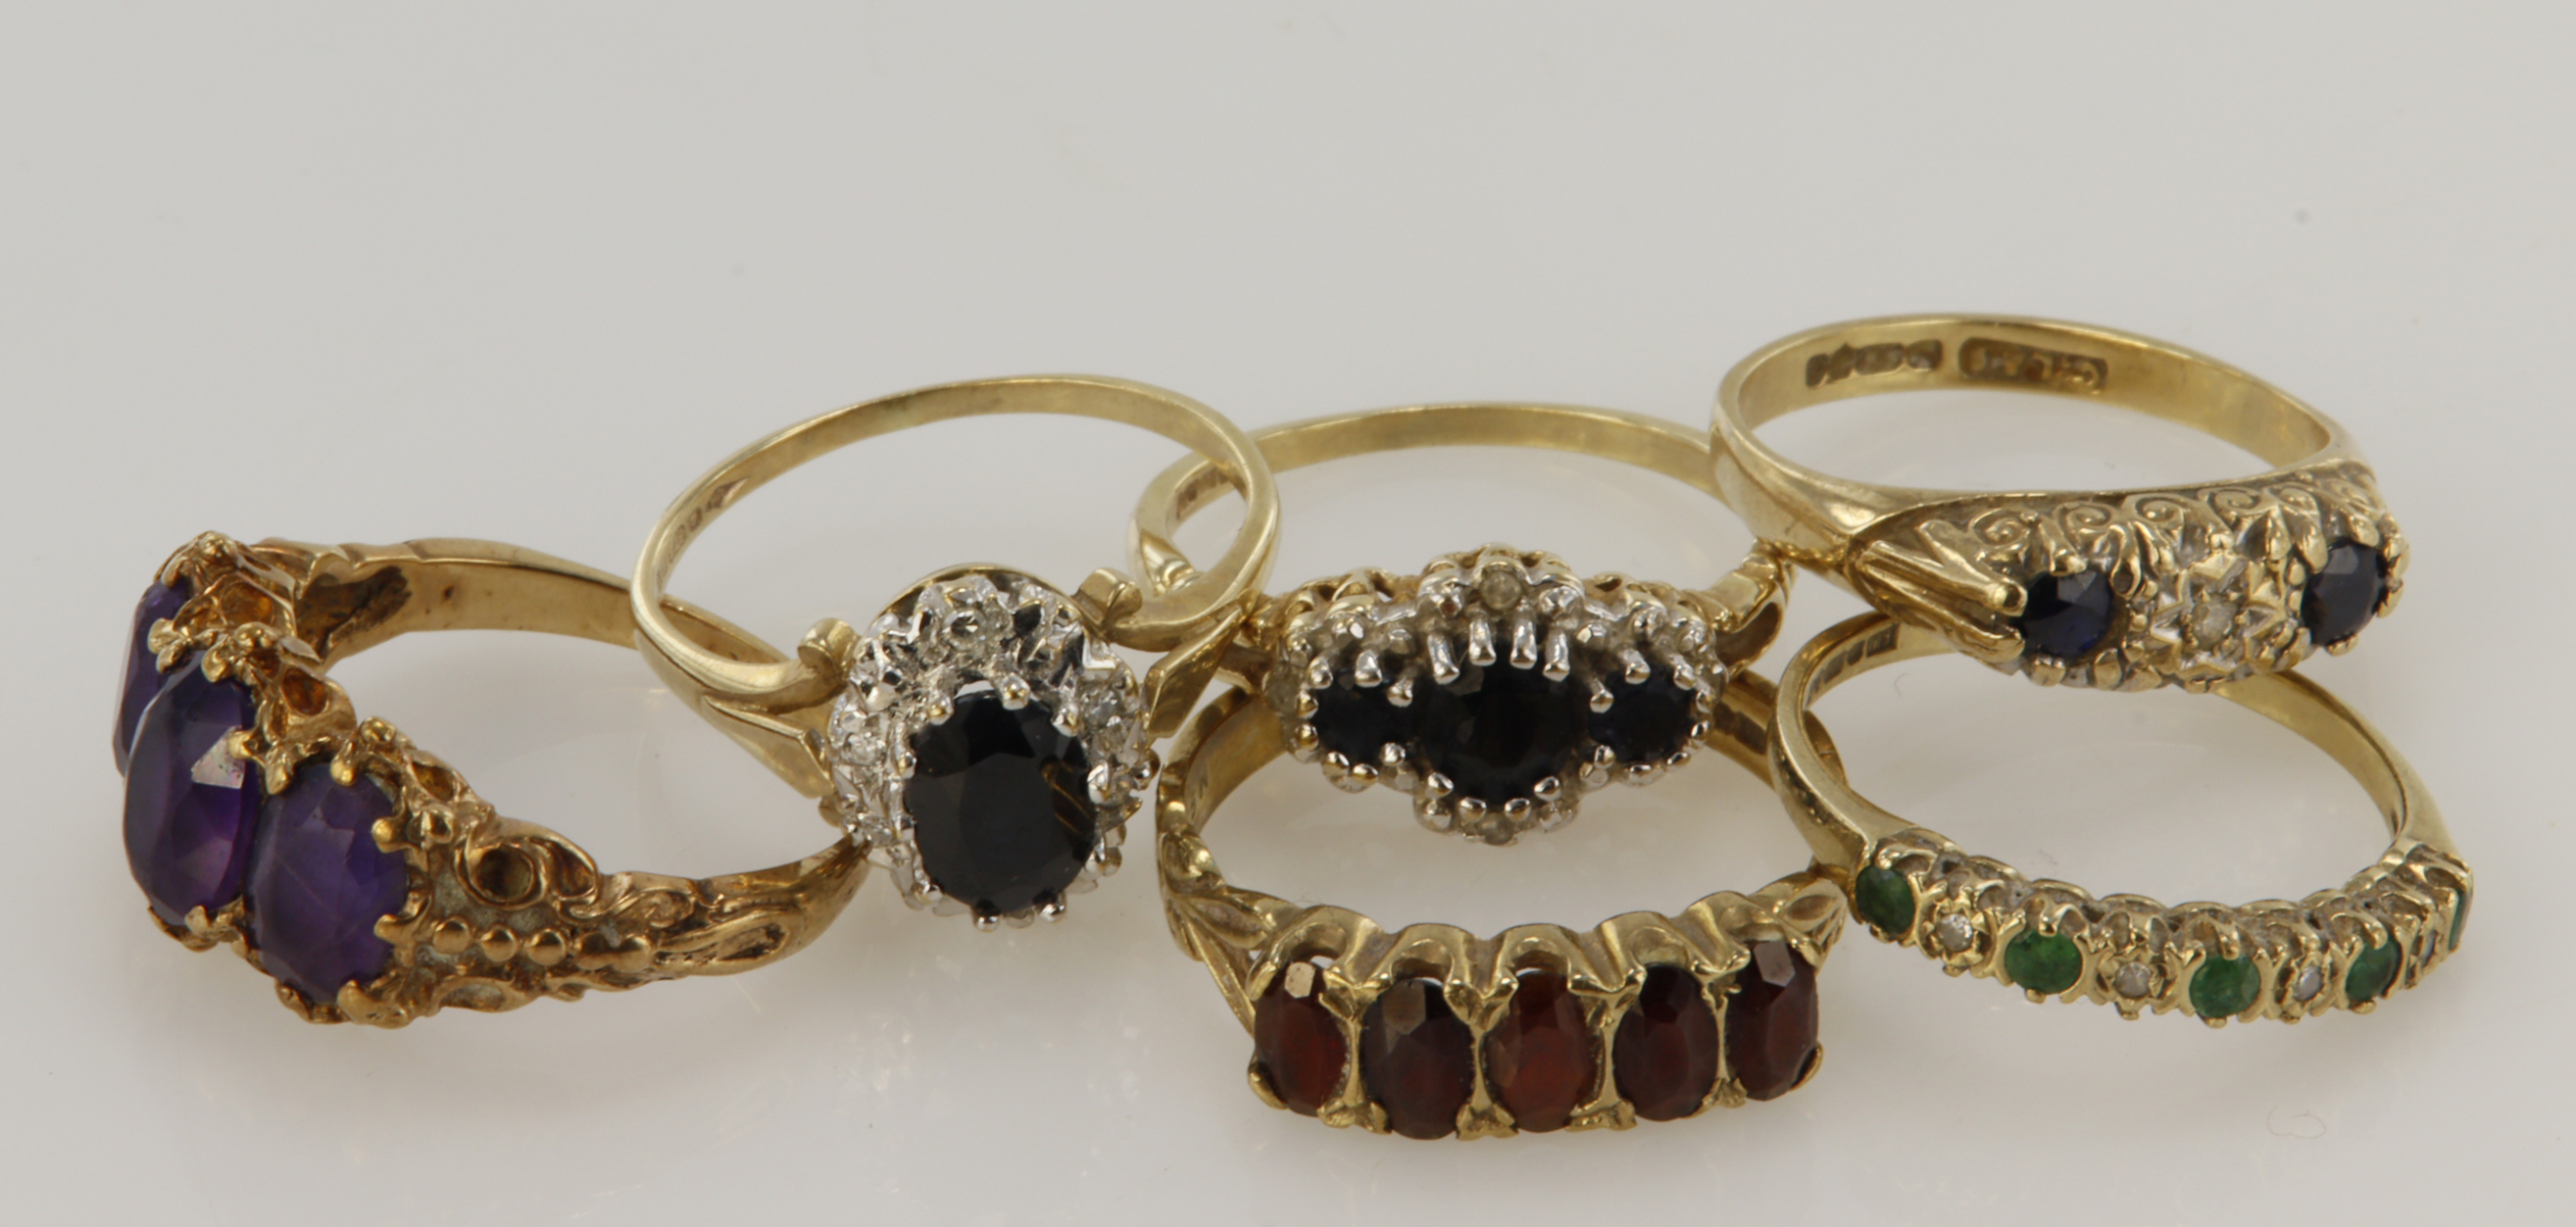 Six 9ct gold/tests 9ct rings, stones include diamond, sapphire, emerald, garnet, finger sizes Lx4,